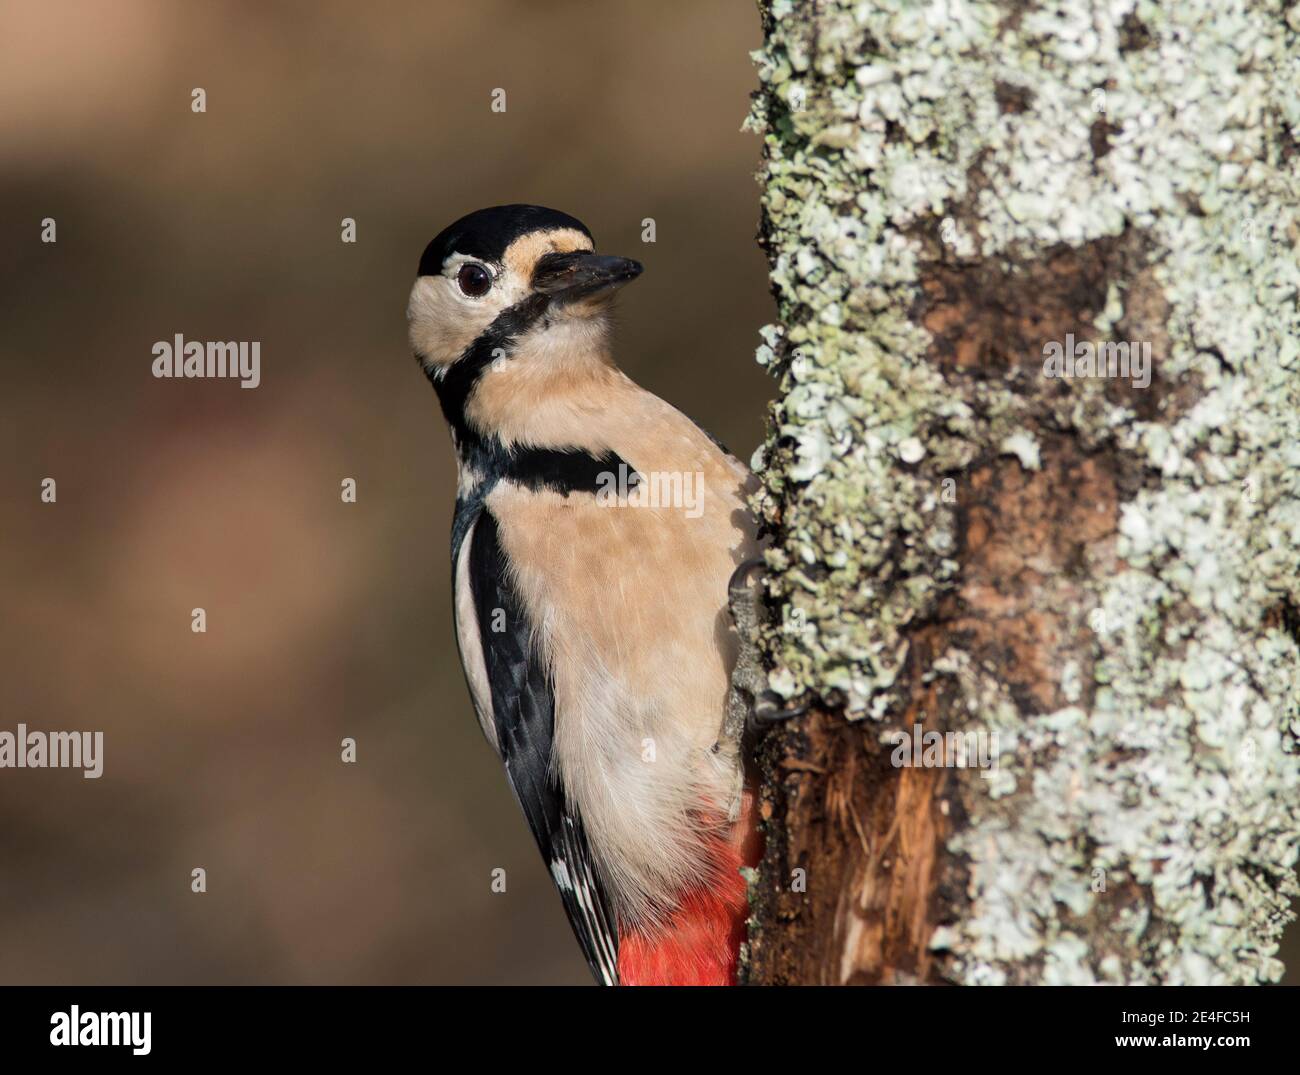 Male Great Spotted Woodpecker (Dendrocopus major) on a lichen covered oak tree. Stock Photo